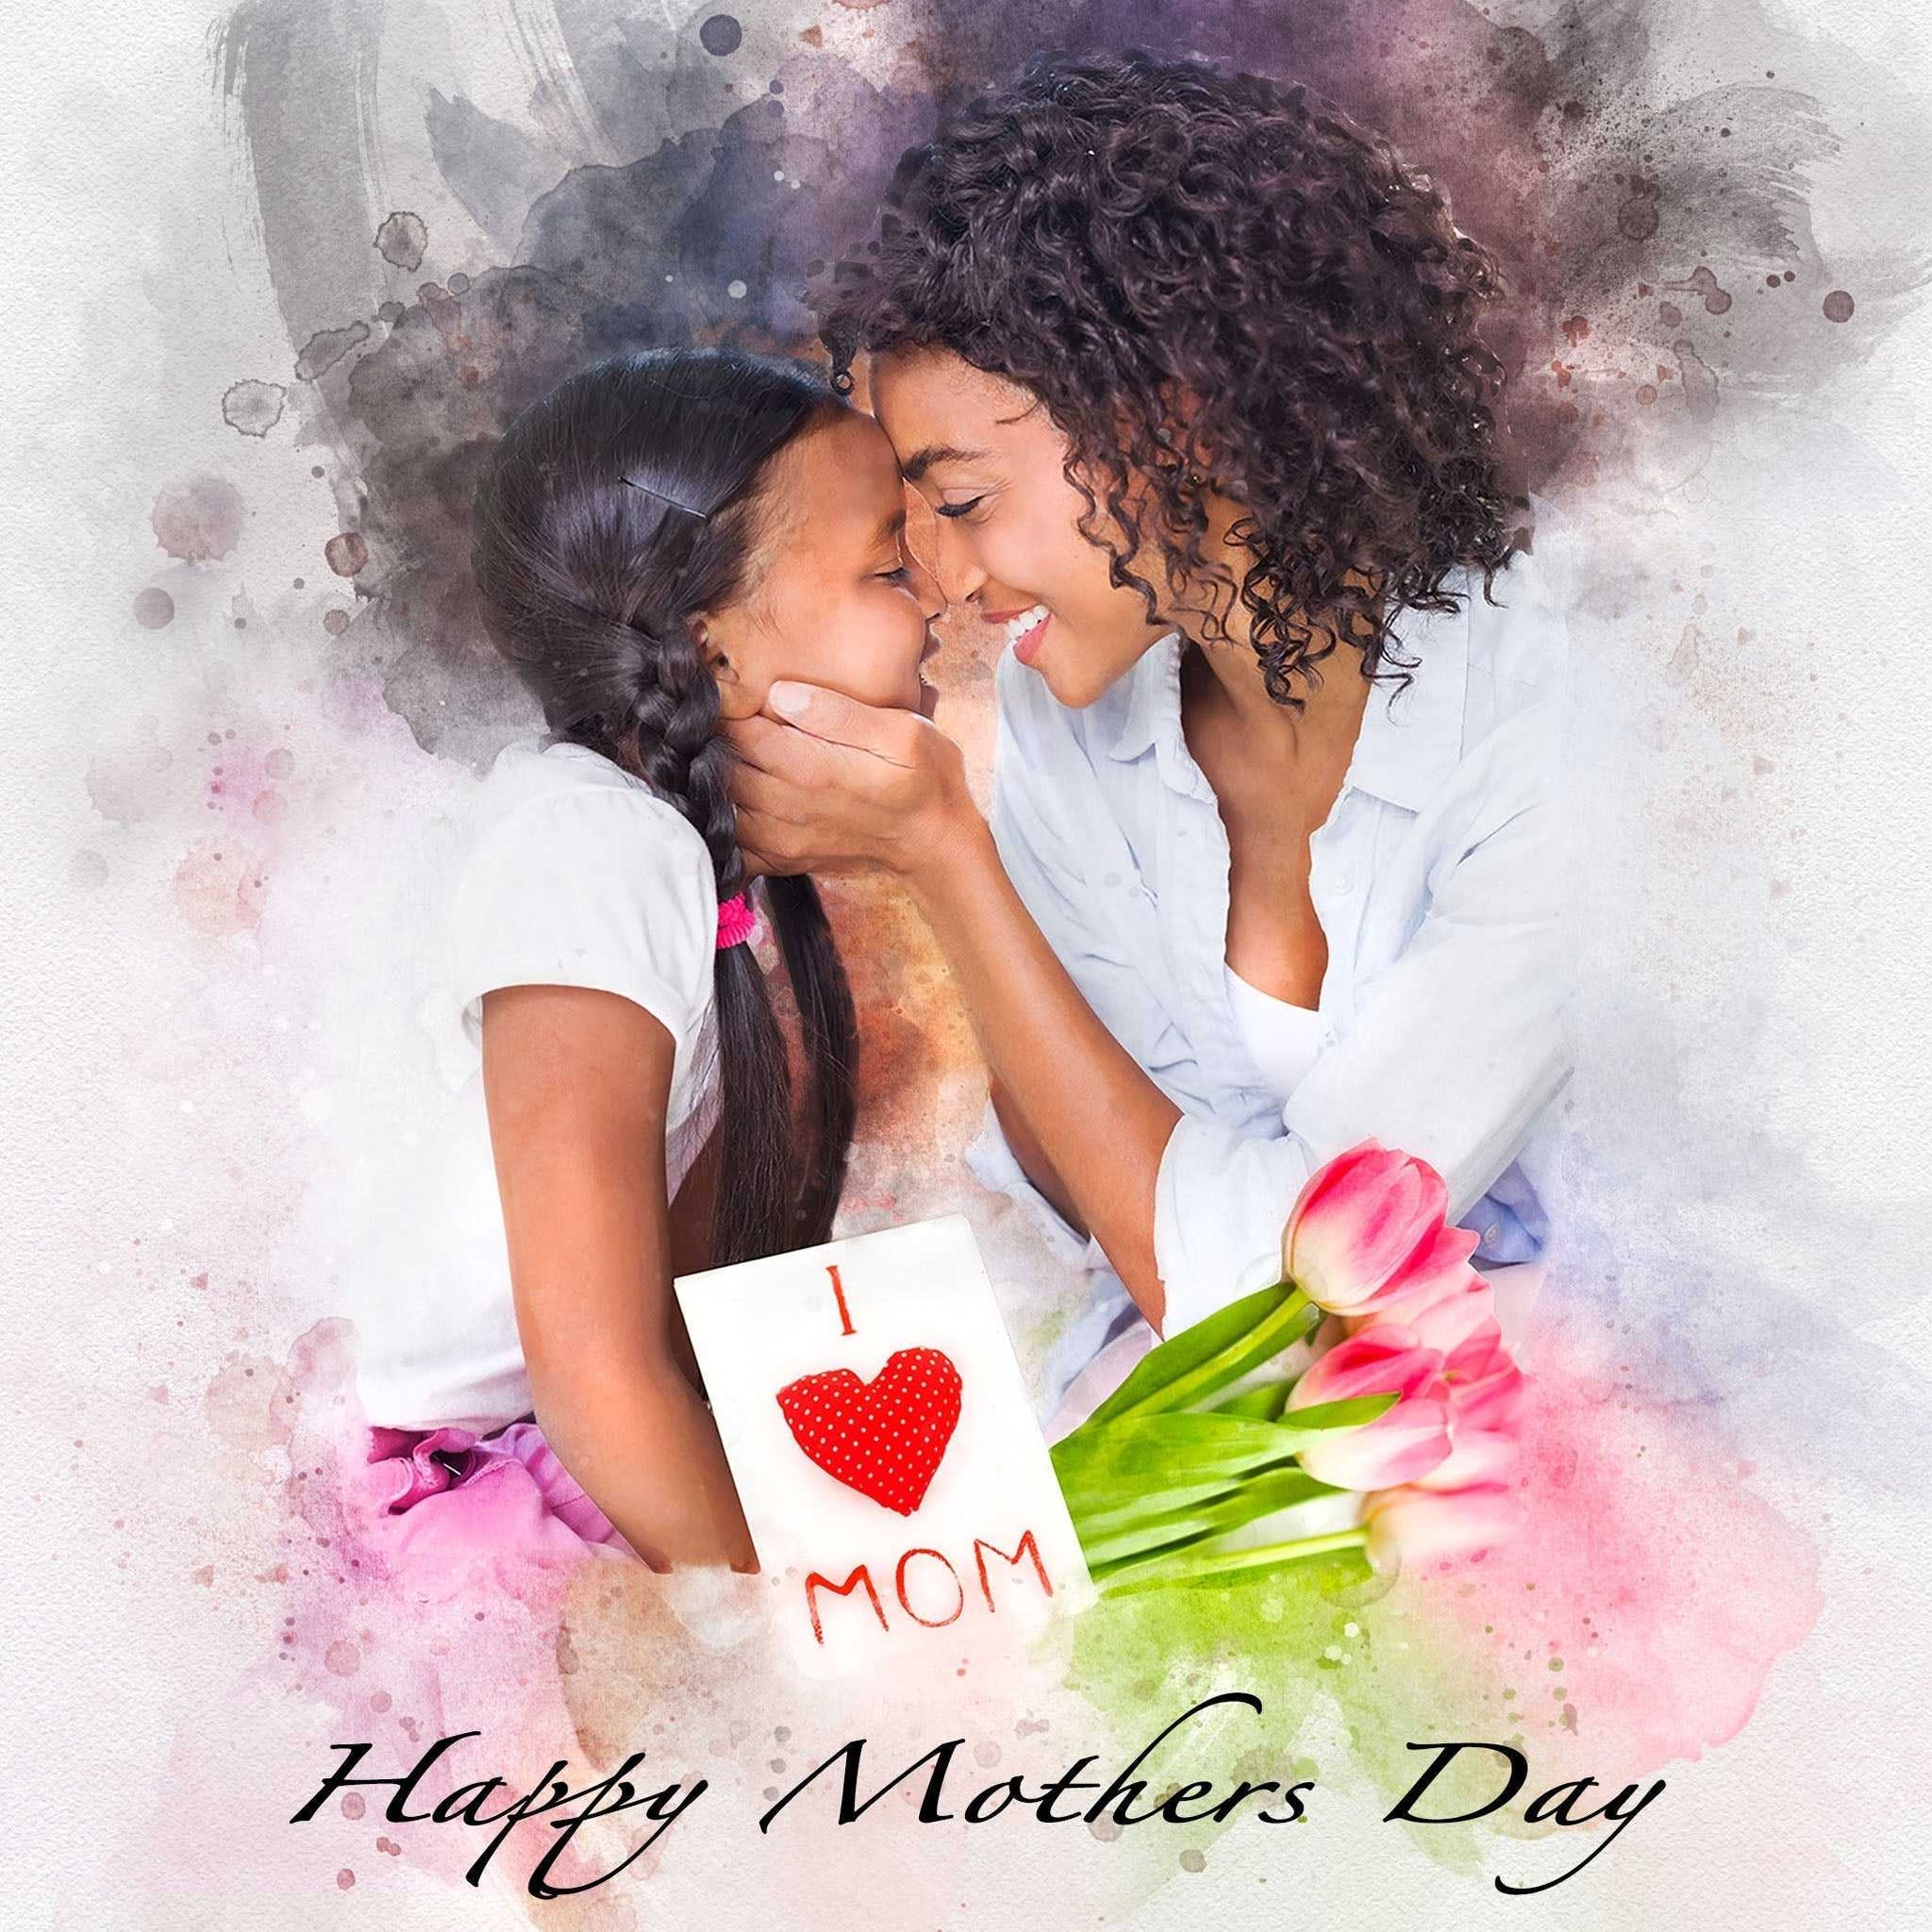 Mothers Day Gift from Son | Custom Portrait Painting from Photo | Gift for Mother's Day - FromPicToArt